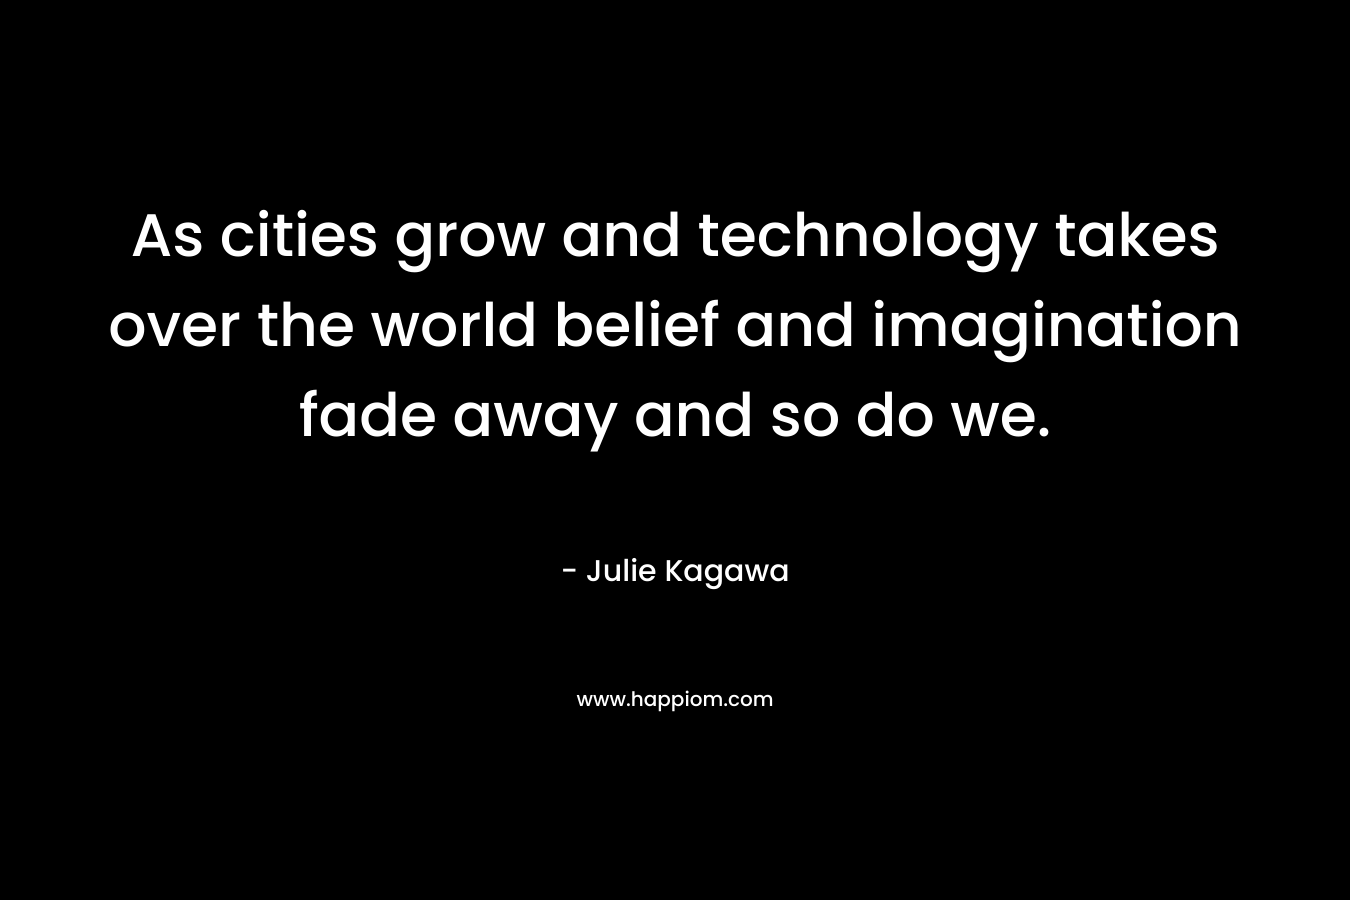 As cities grow and technology takes over the world belief and imagination fade away and so do we.